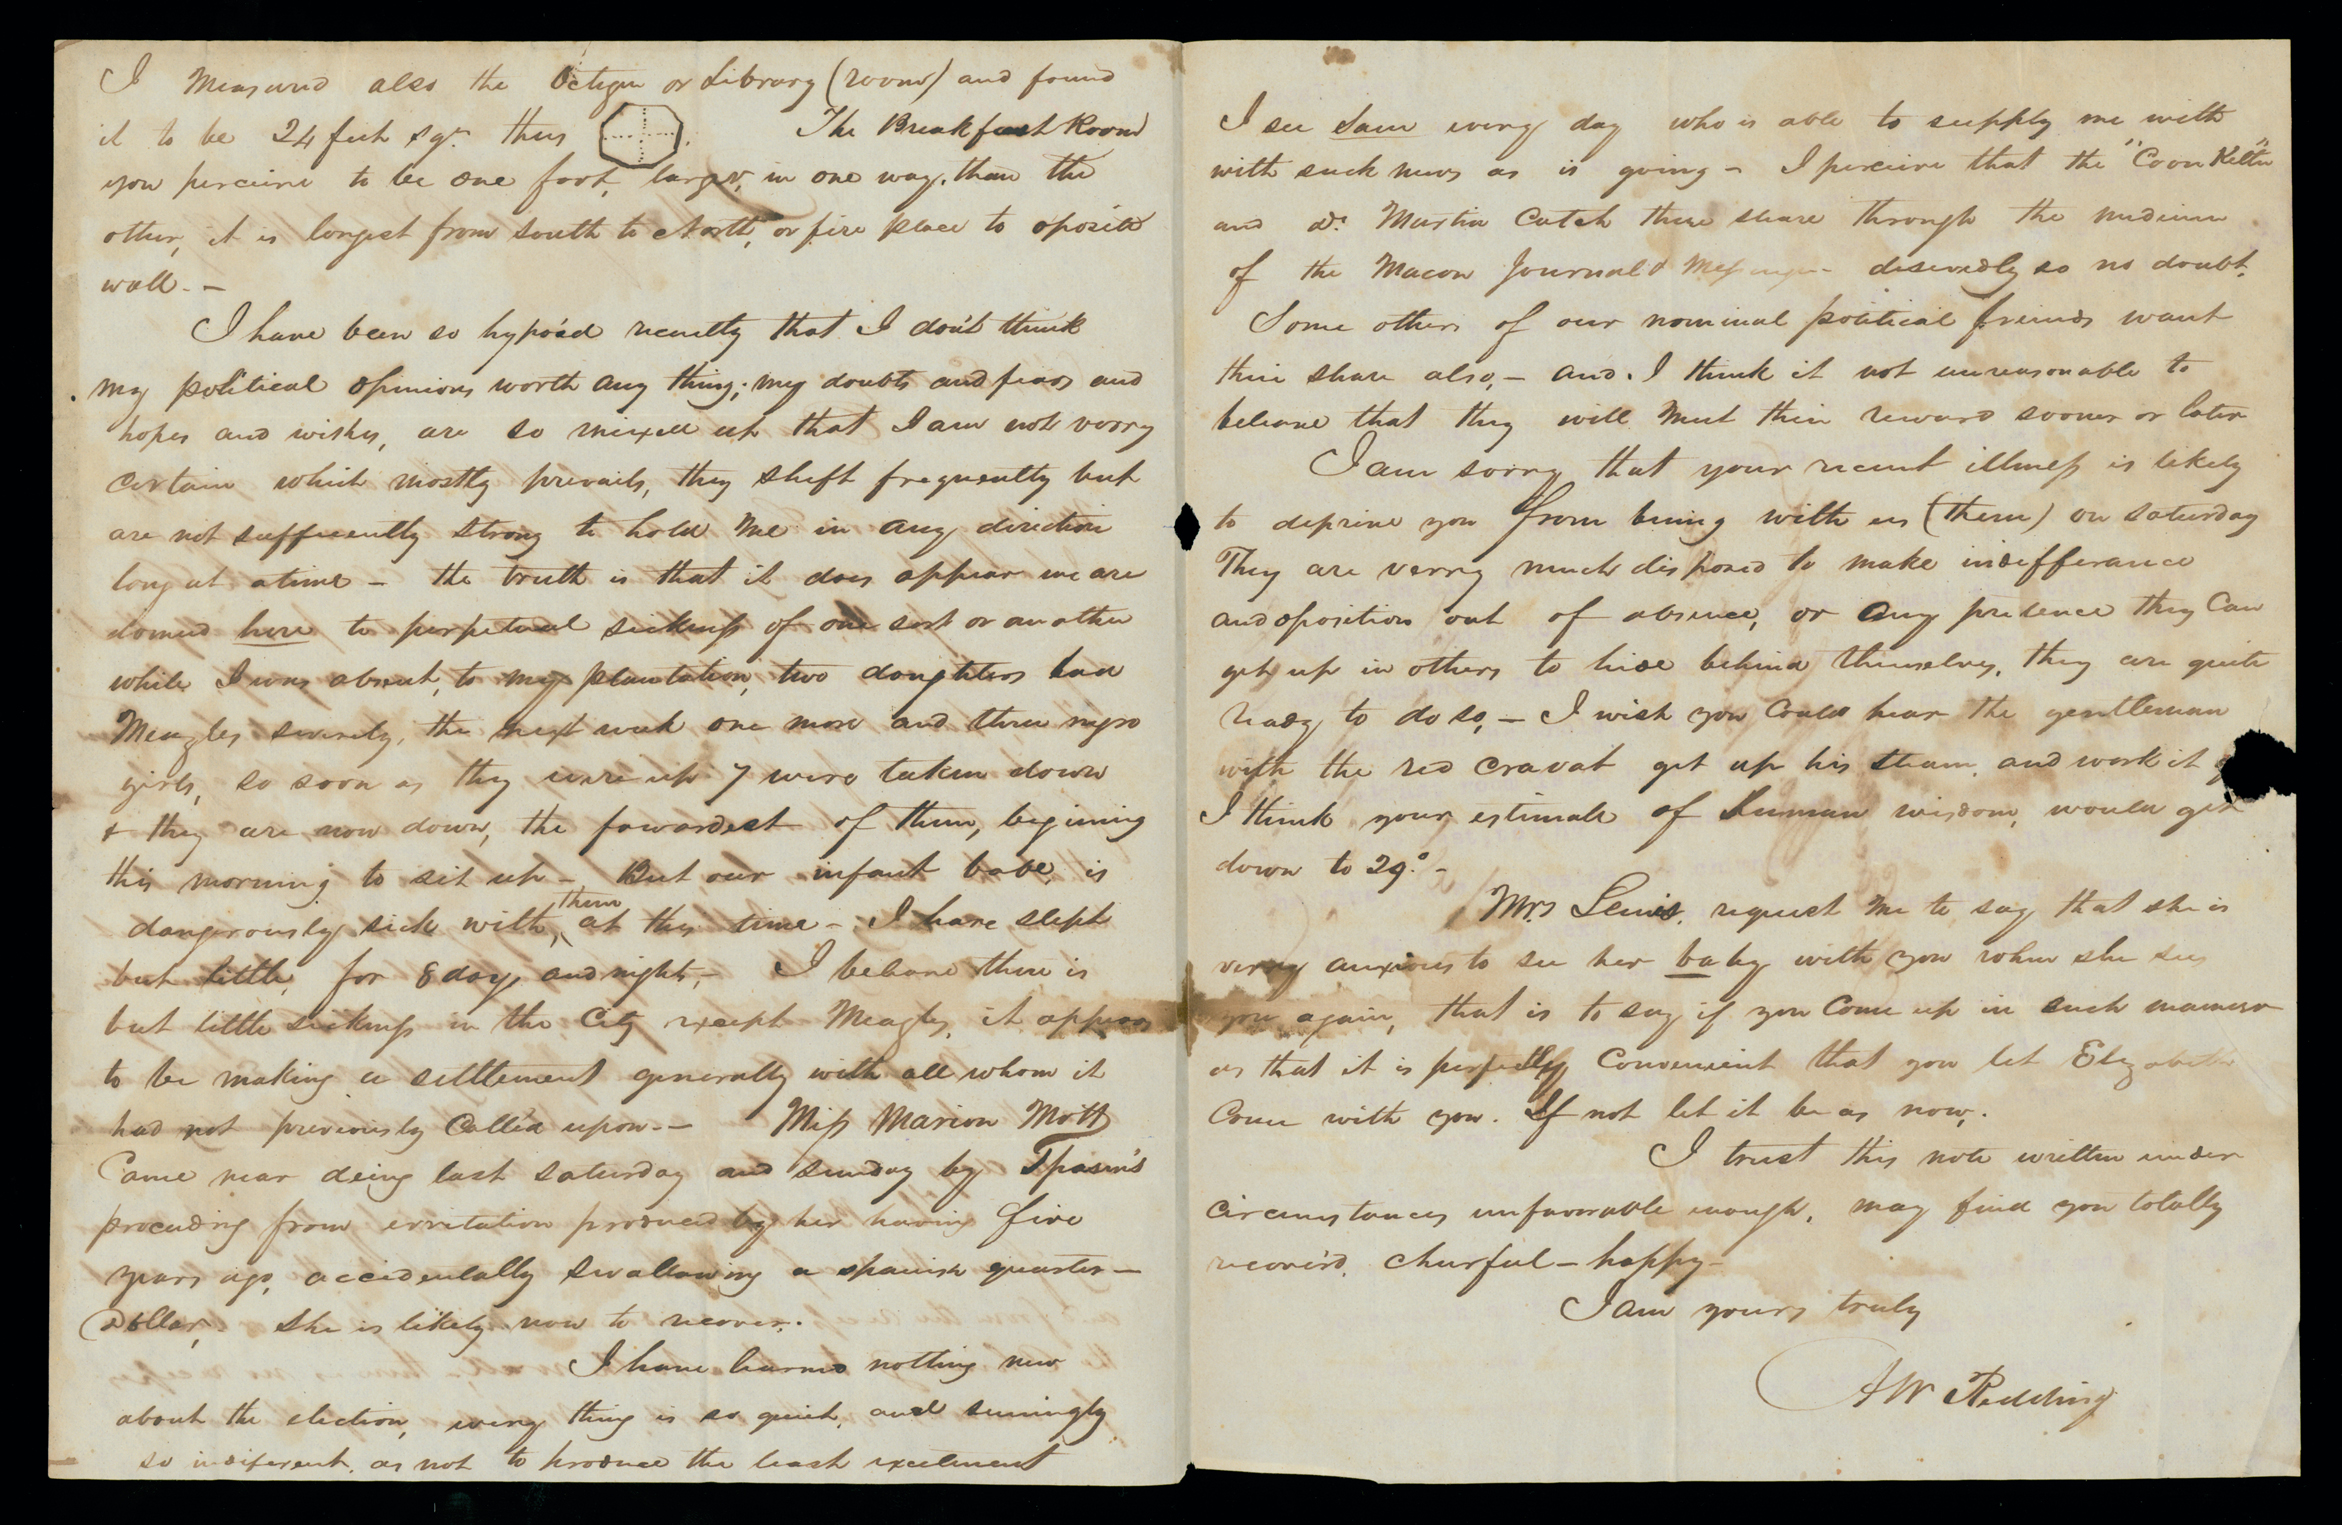 Letter, A. W. Redding, Milledgeville, Georgia, to His Excellency Geo[rge] W. Crawford, Bel-air, Georgia, Pages 2-3